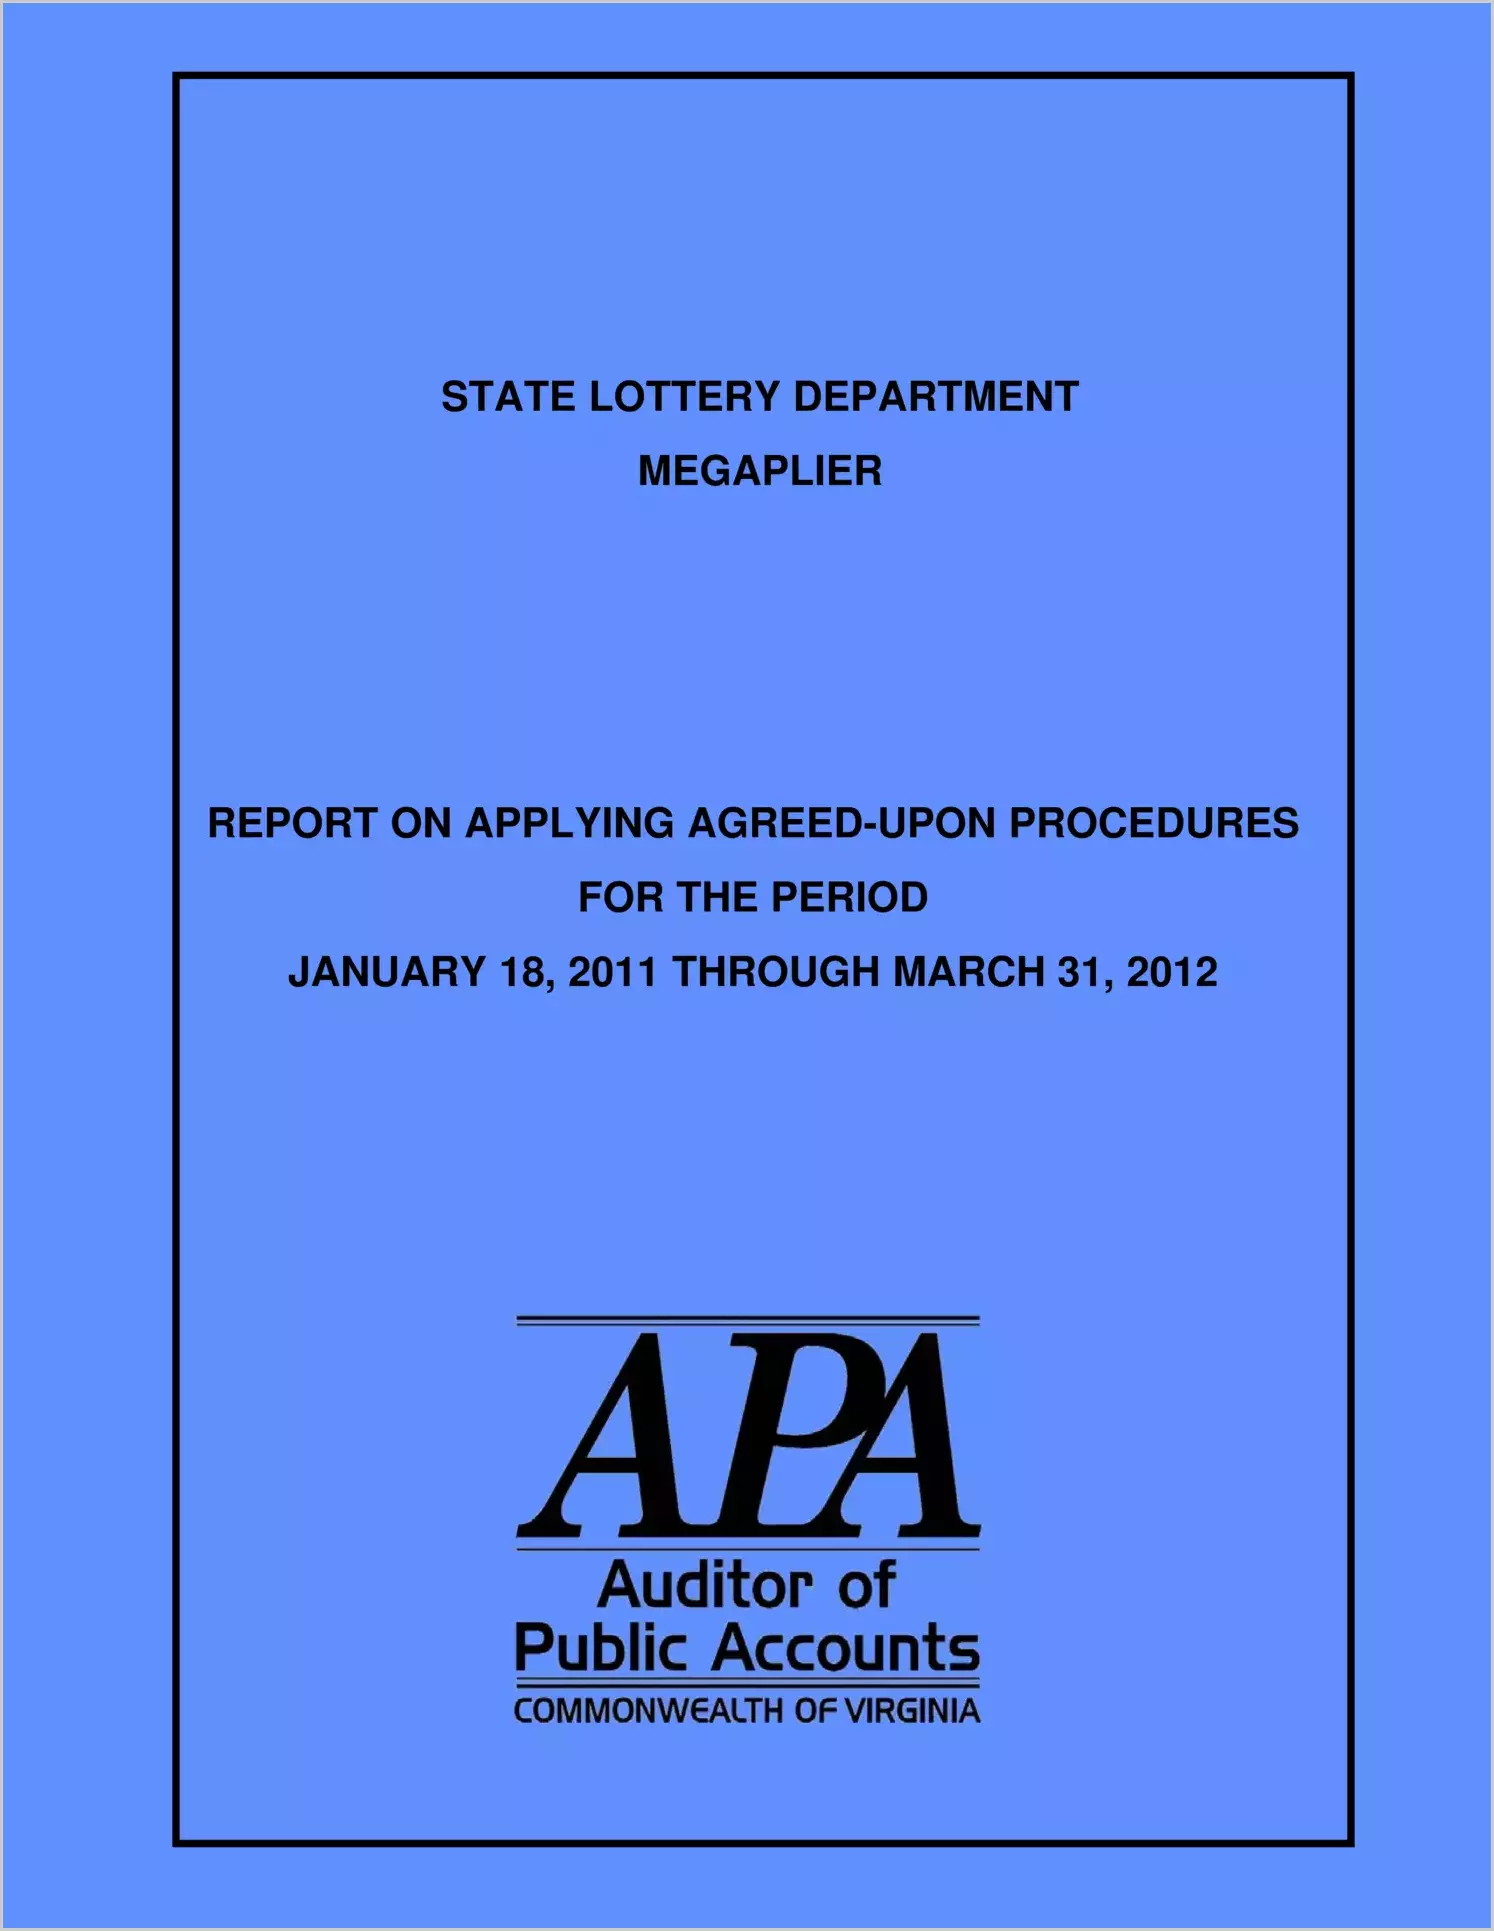 State Lottery Department Megaplier report on Applying Agreed-Upon Procedures for the period January 18, 2011 through March 31, 2012